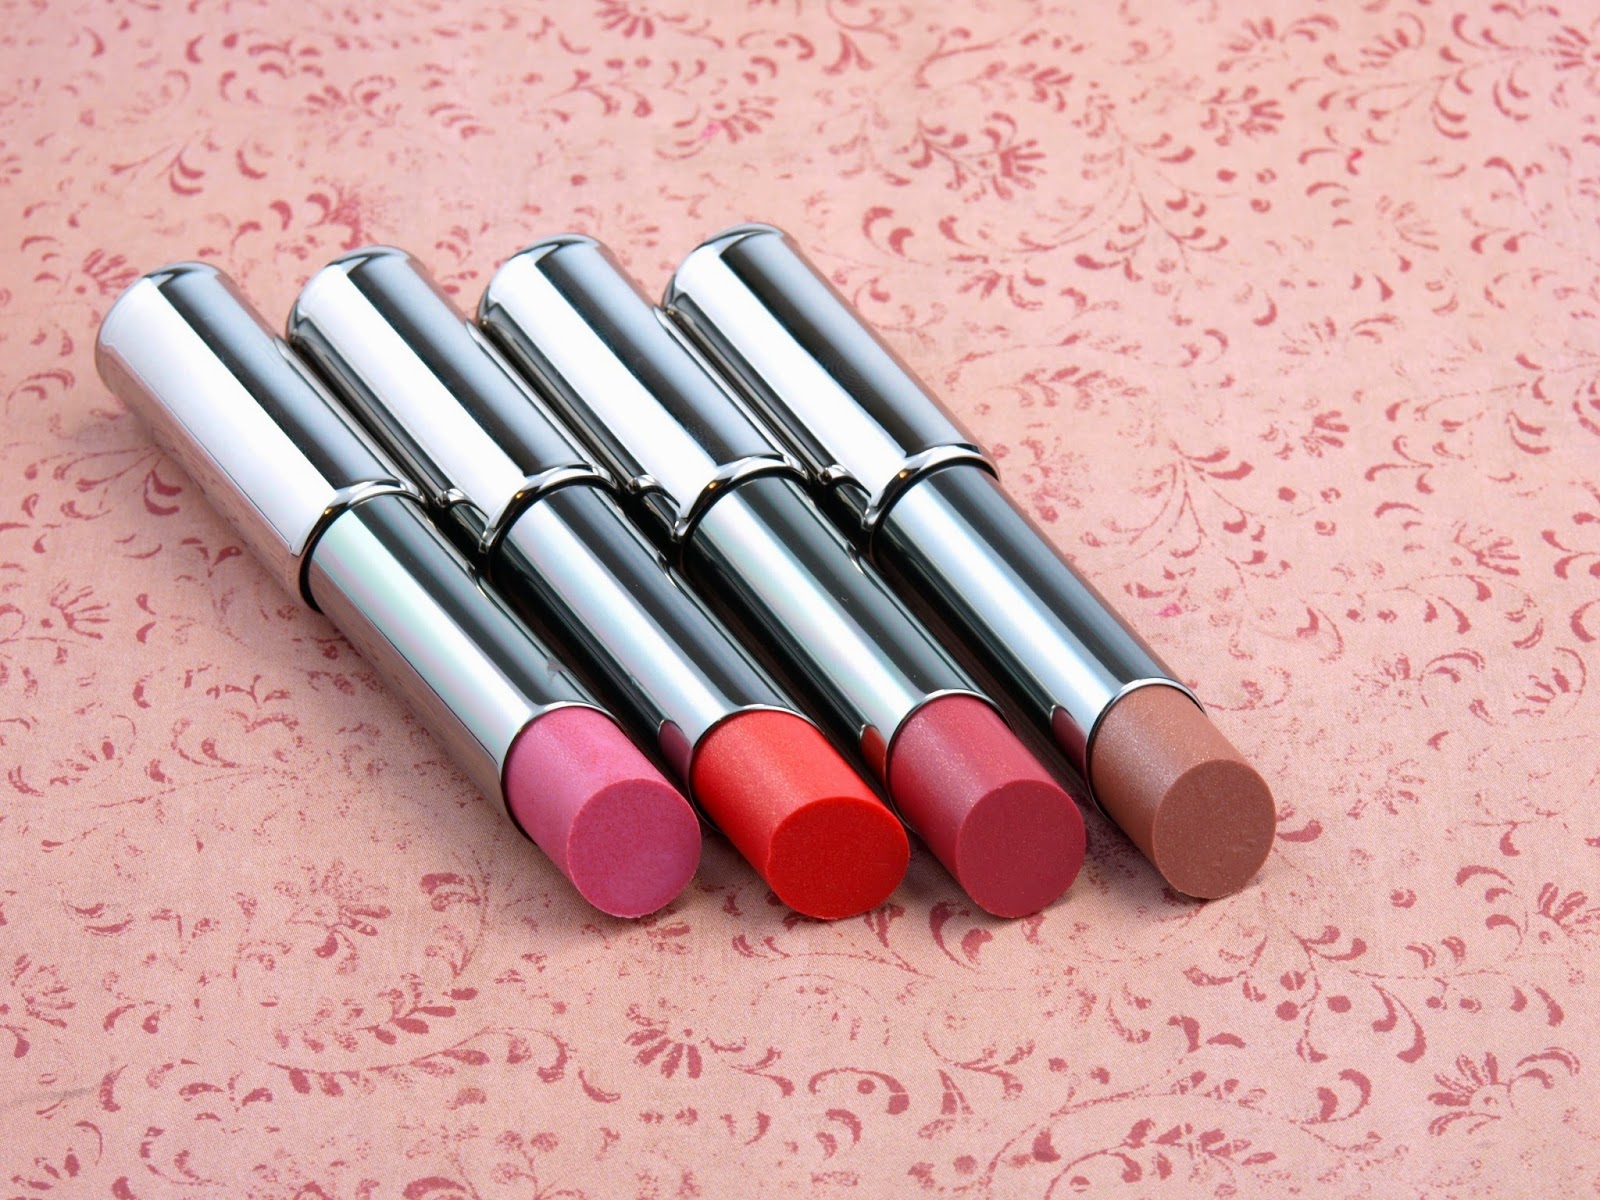 Mary Kay Spring 2015 True Dimensions Lipstick New Sheer Shades: Review and Swatches | The Happy Sloths: Beauty, Makeup, and Skincare Blog with Reviews and Swatches